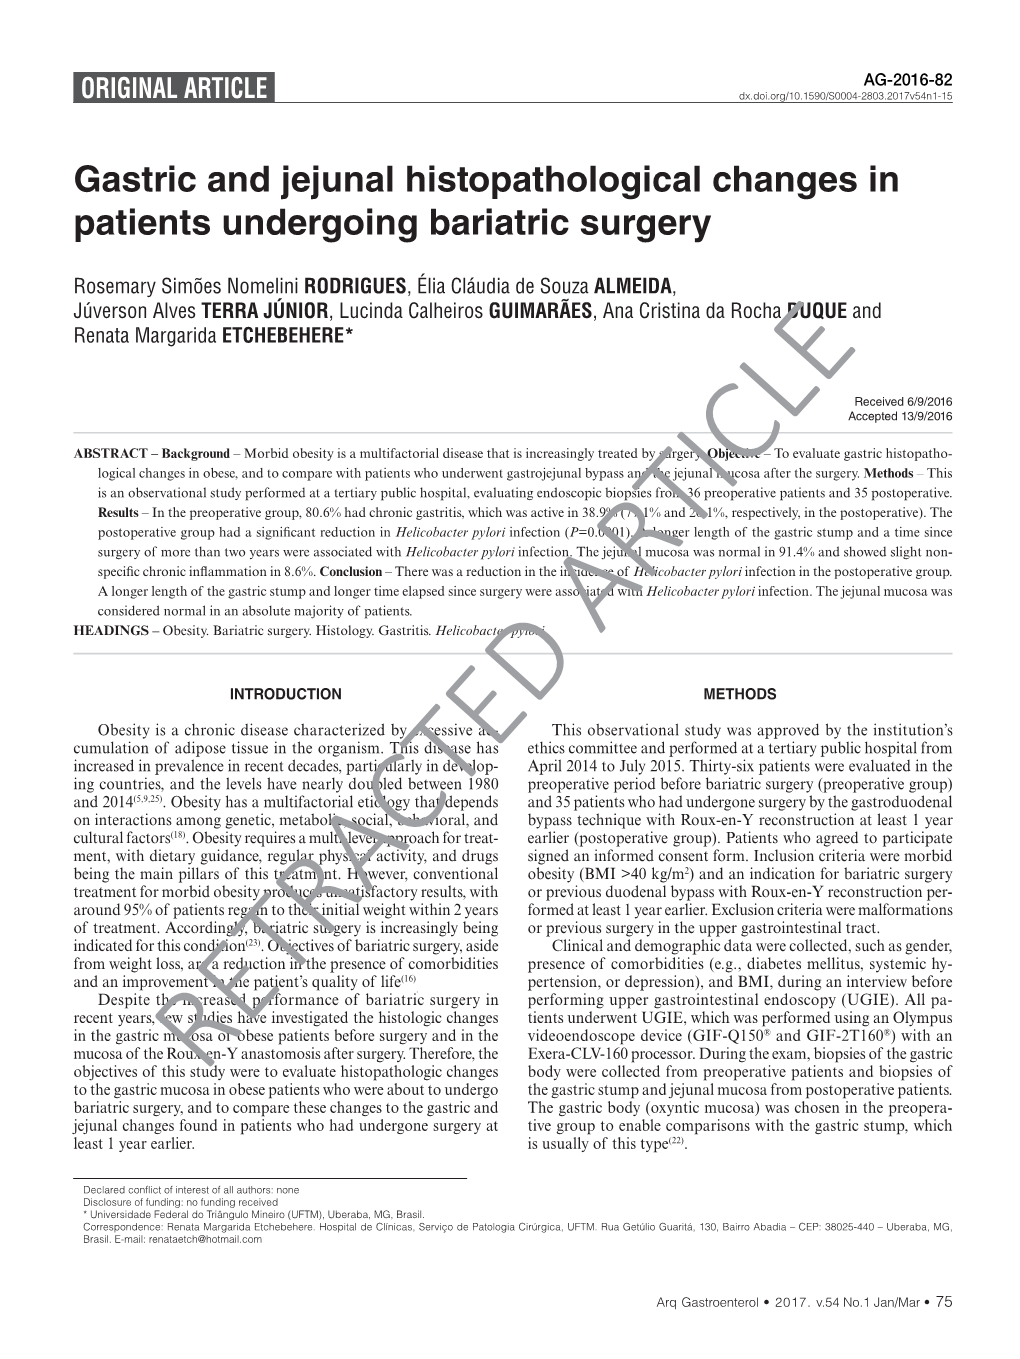 Gastric and Jejunal Histopathological Changes in Patients Undergoing Bariatric Surgery